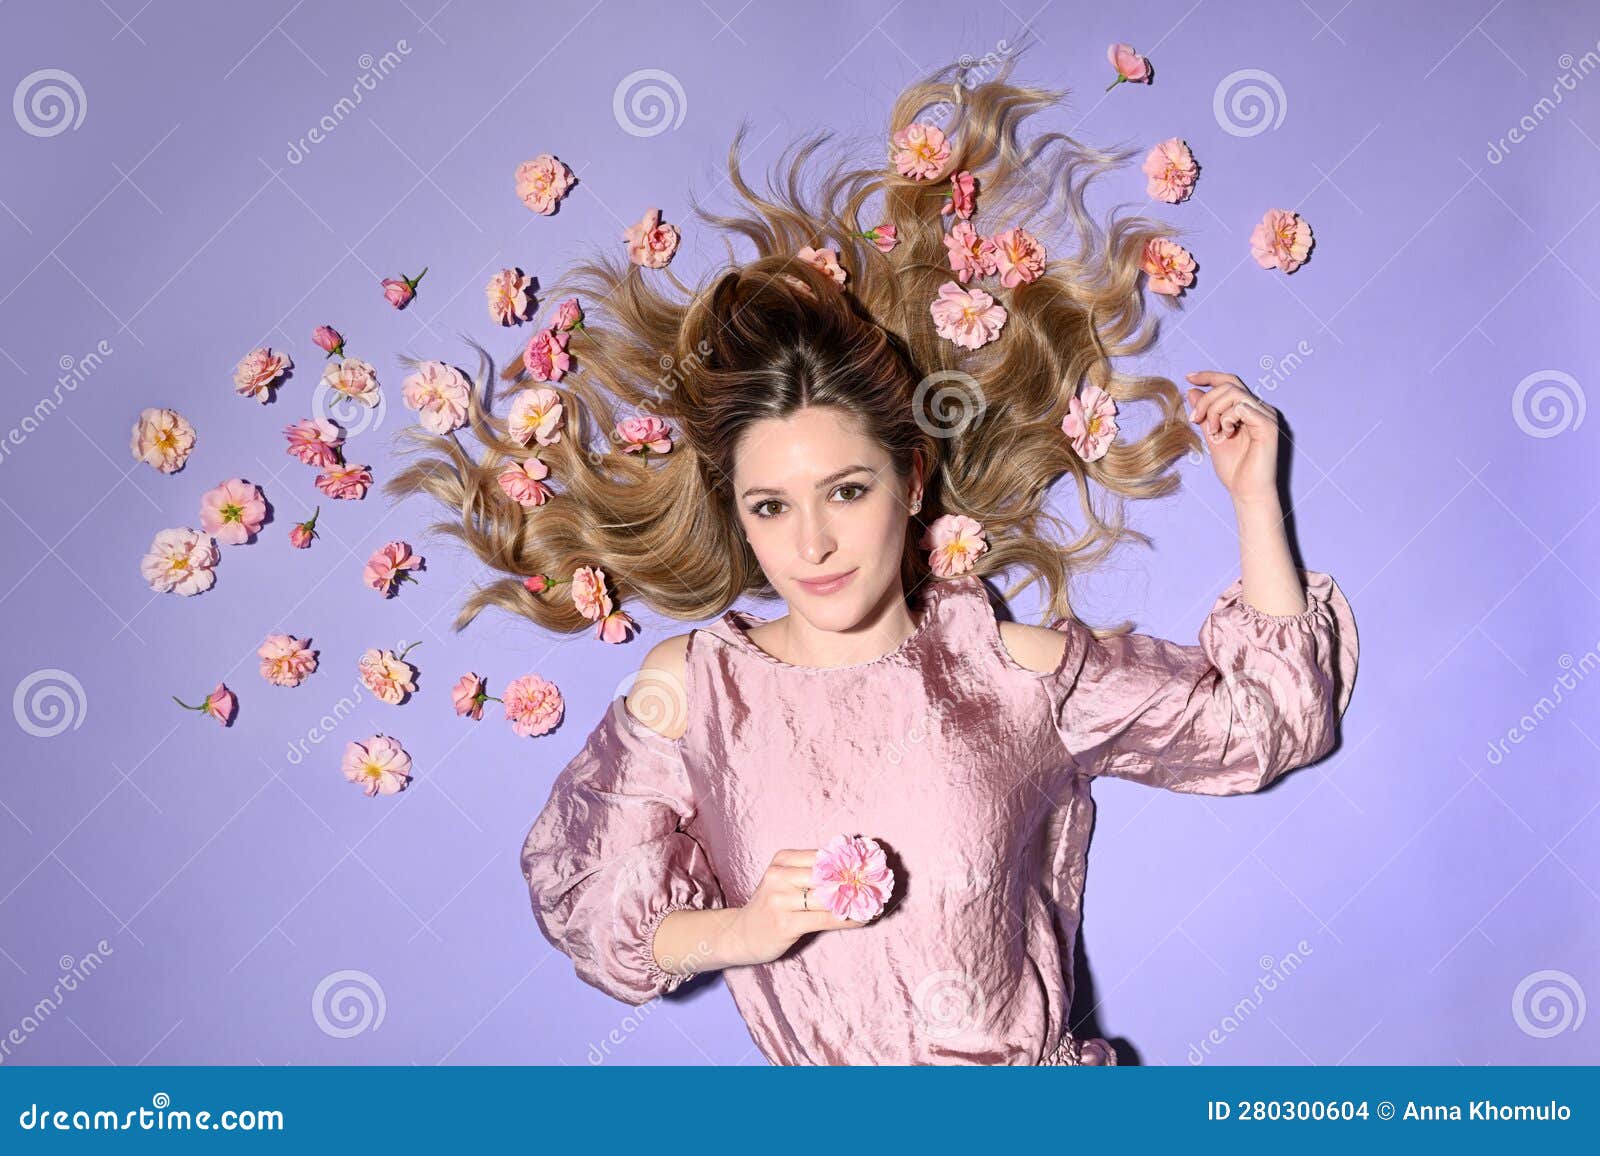 beutiful blond woman with pink roses